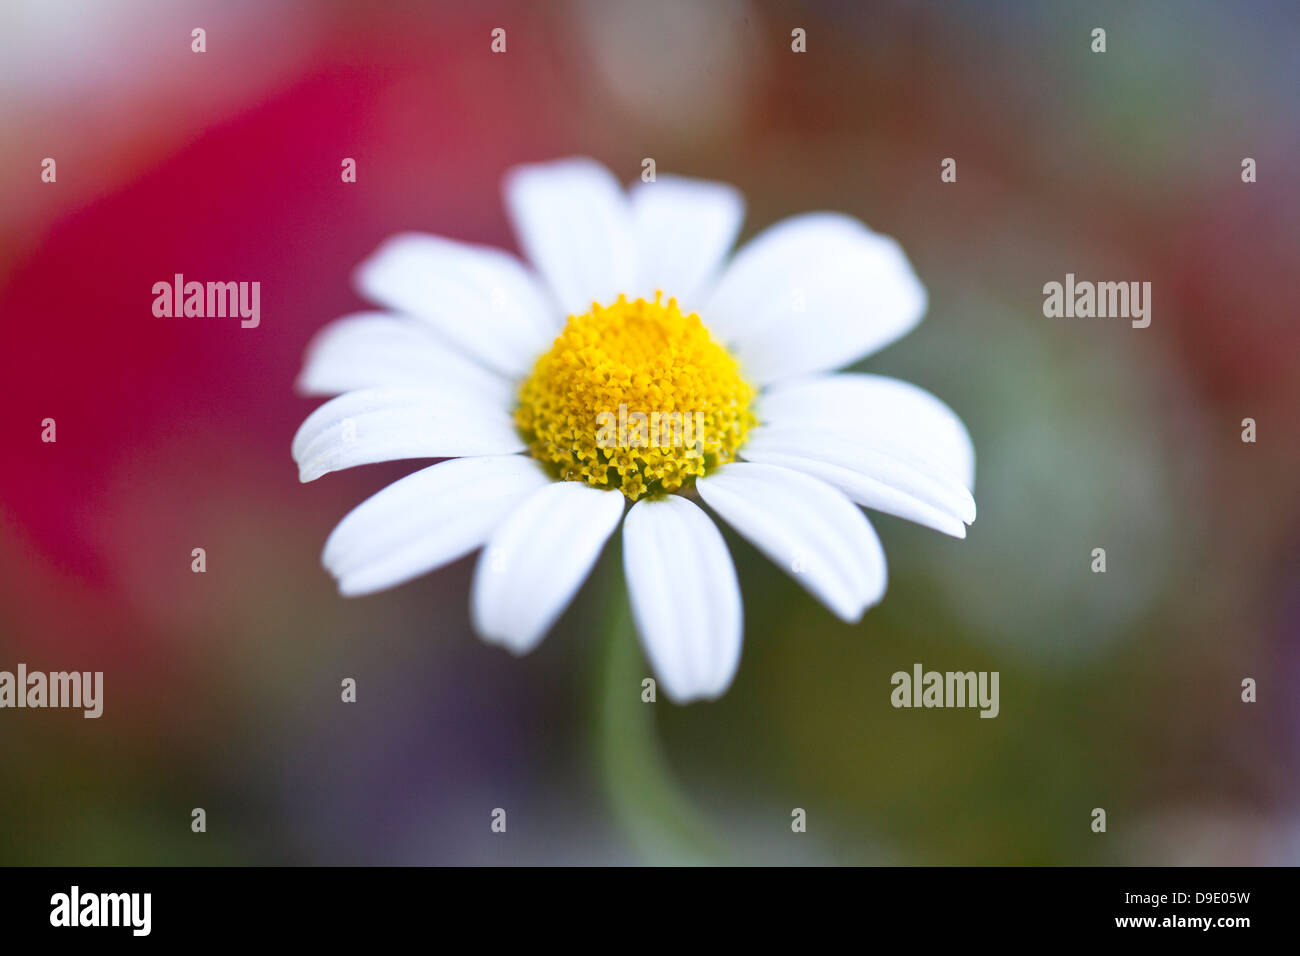 Close up of a daisy in a defocused colorful background Stock Photo